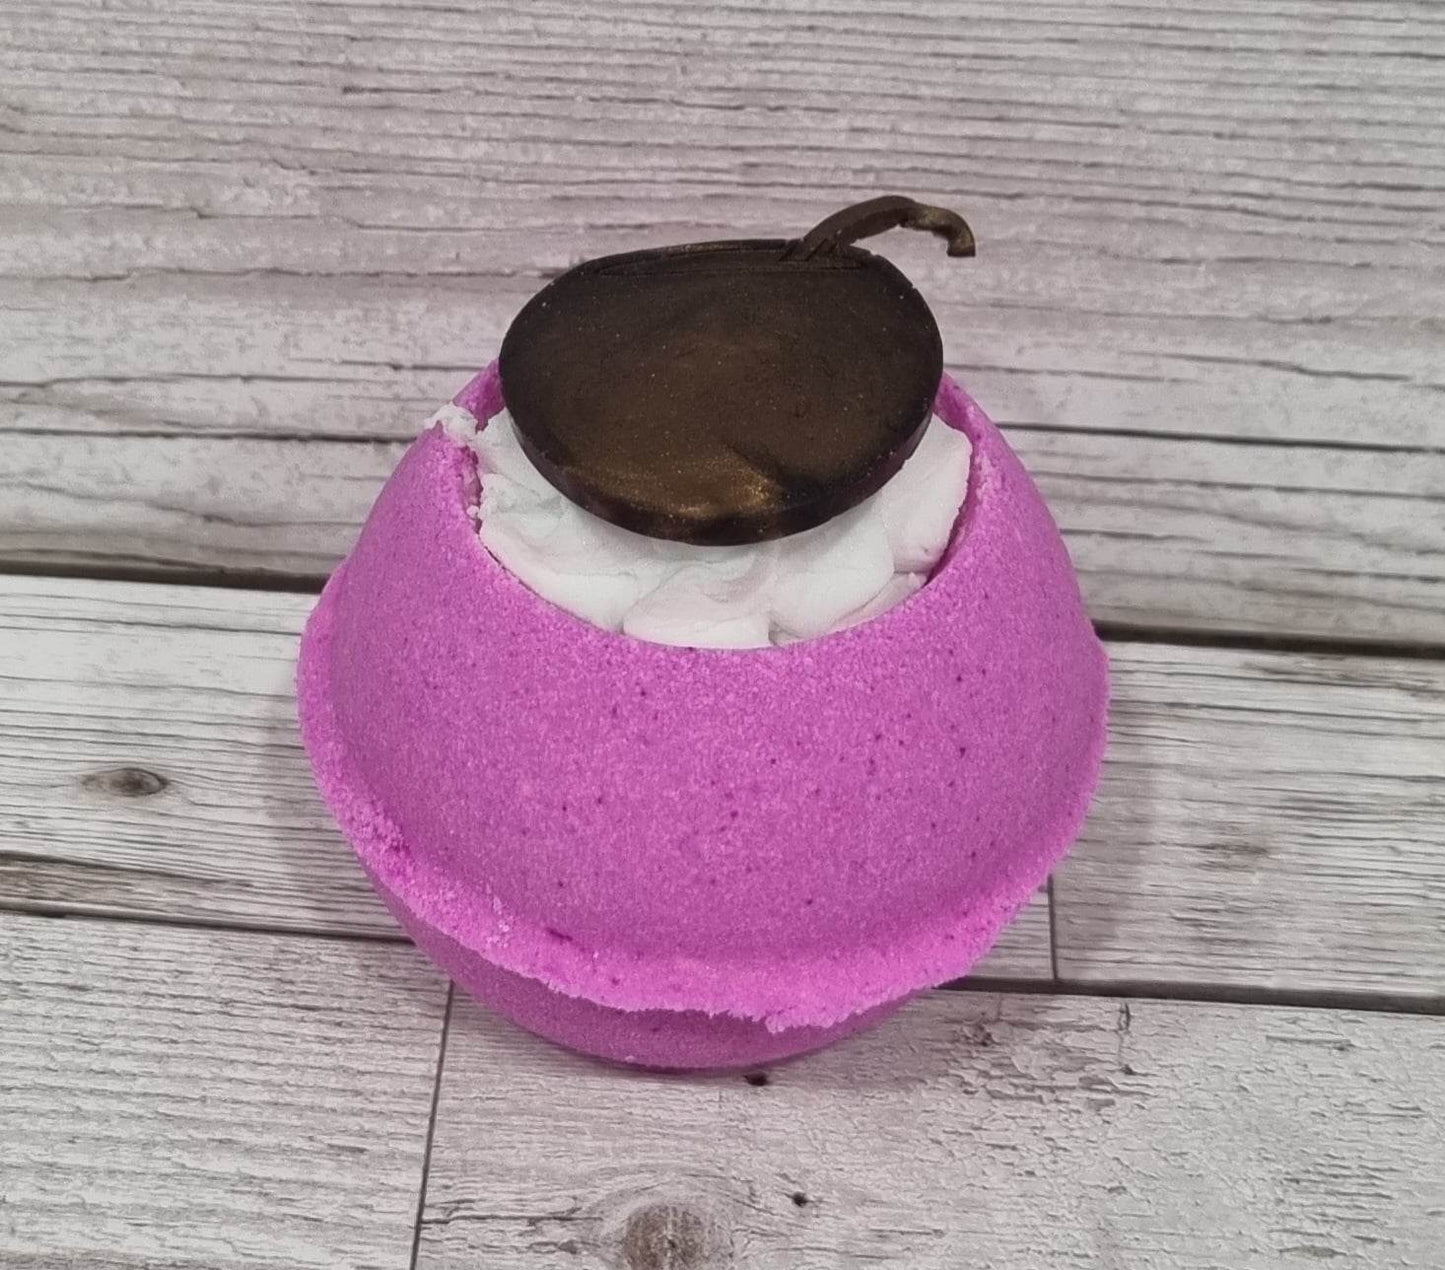 'Pacific Coconut' Whipped Top Bath Bomb